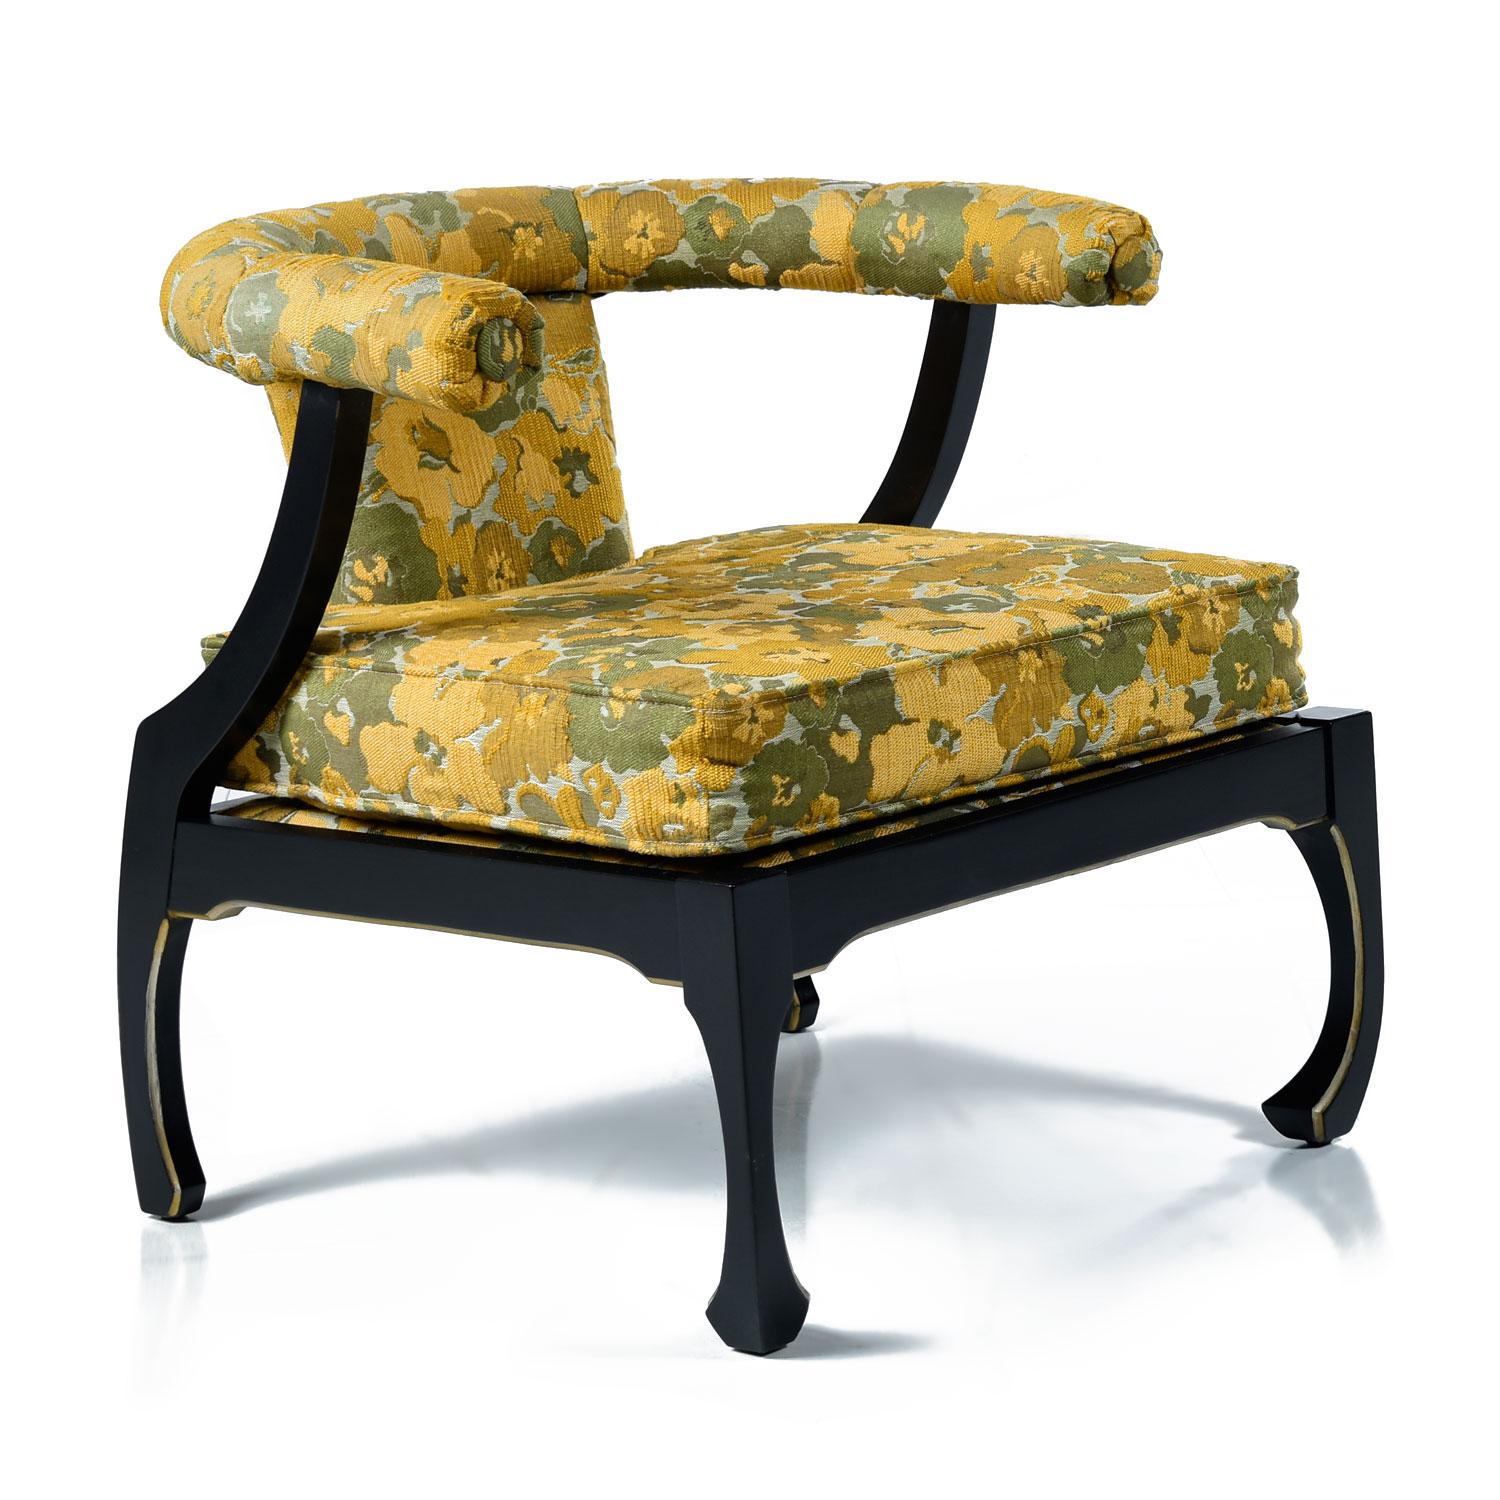 Blackened James Mont Style Black Lacquer Gilt Asian Modern Chinoiserie Armchairs by Harris